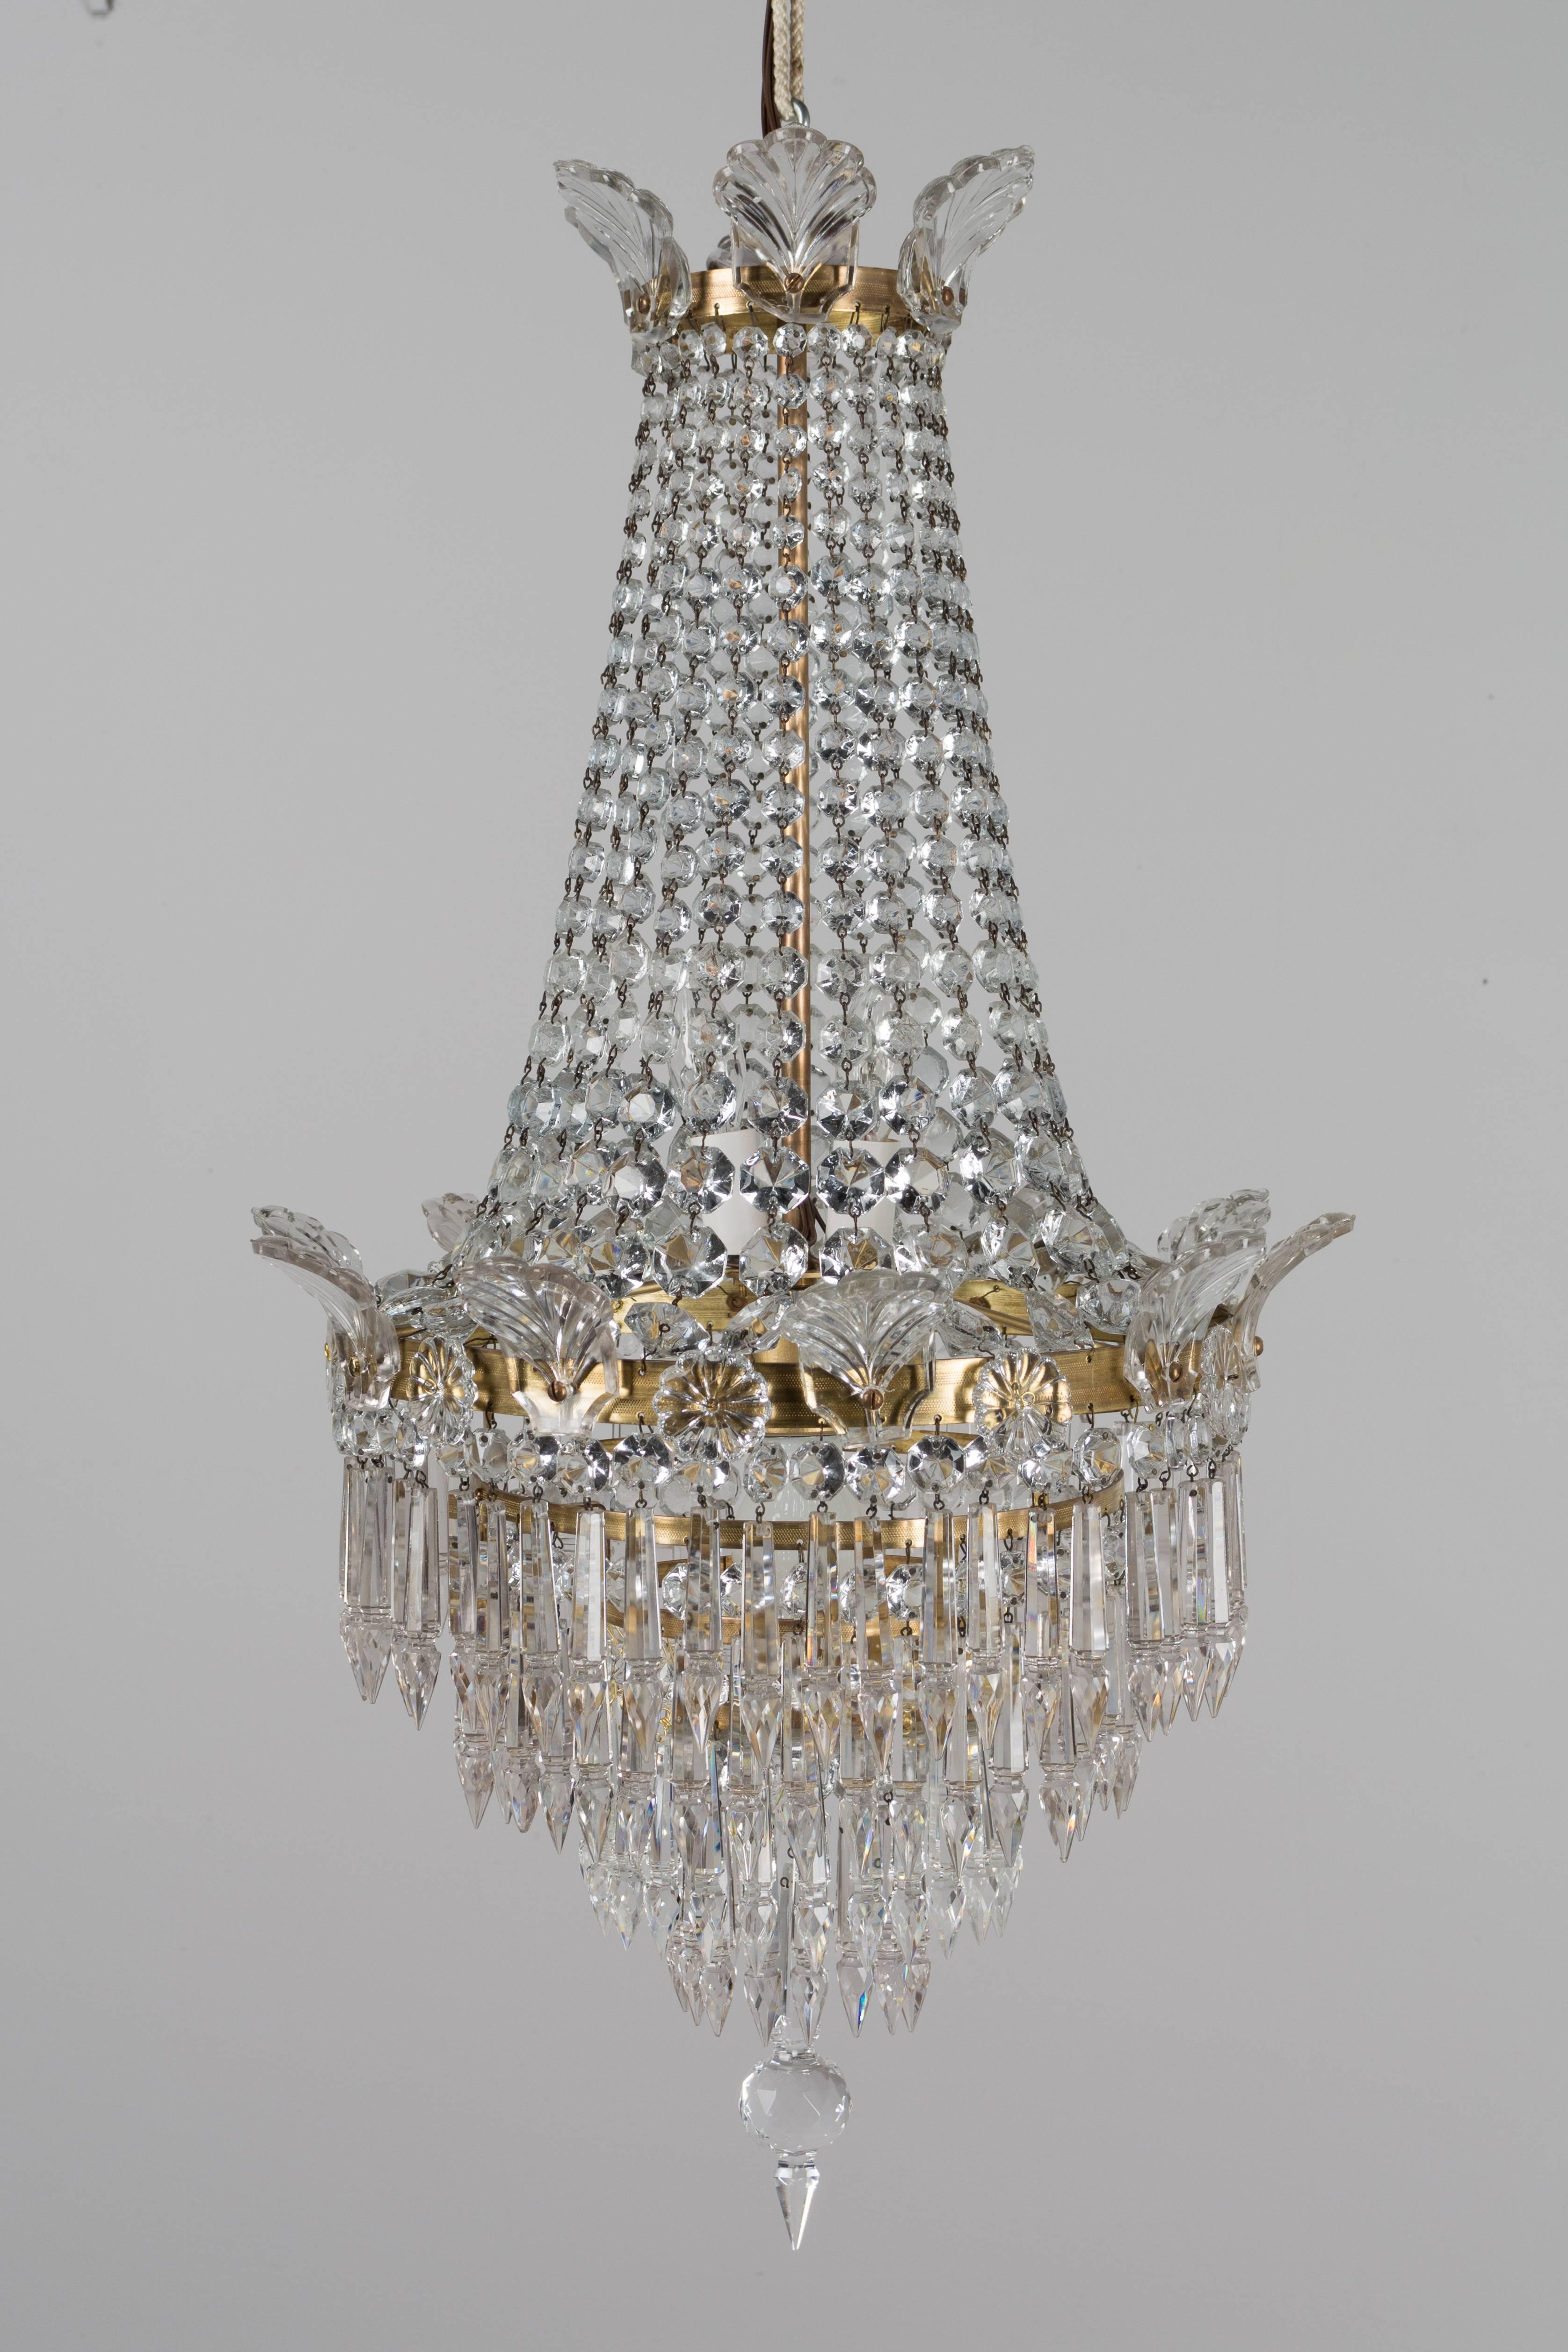 A French Empire style three-light crystal chandelier with brass frame. A beautiful waterfall form with multiple strands of faceted bead chains and four tiers of hanging prisms. The faceted sphere at the bottom is new, but matches the original. One